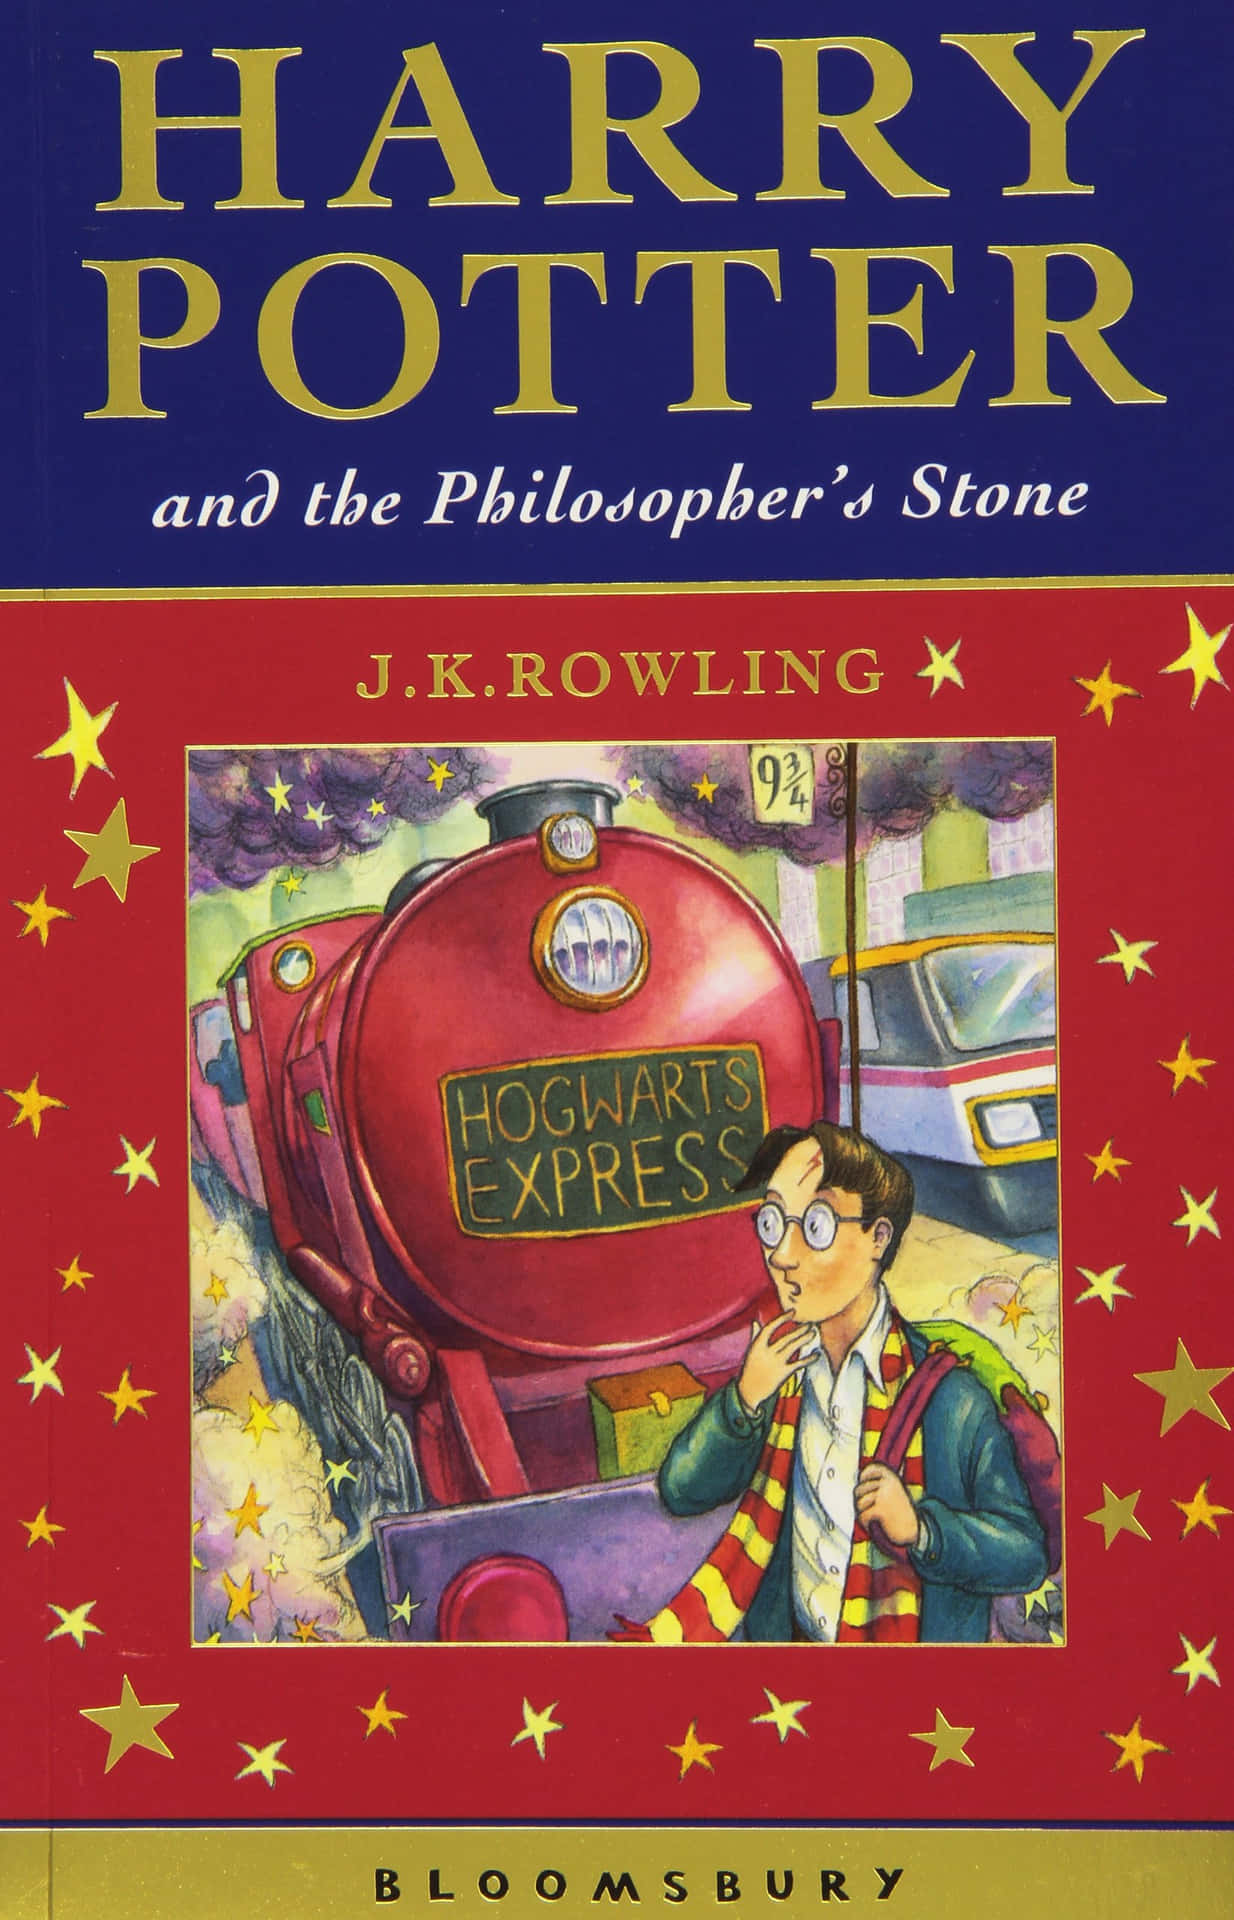 The Philosopher’s Stone, magical relic sought out by Harry Potter Wallpaper